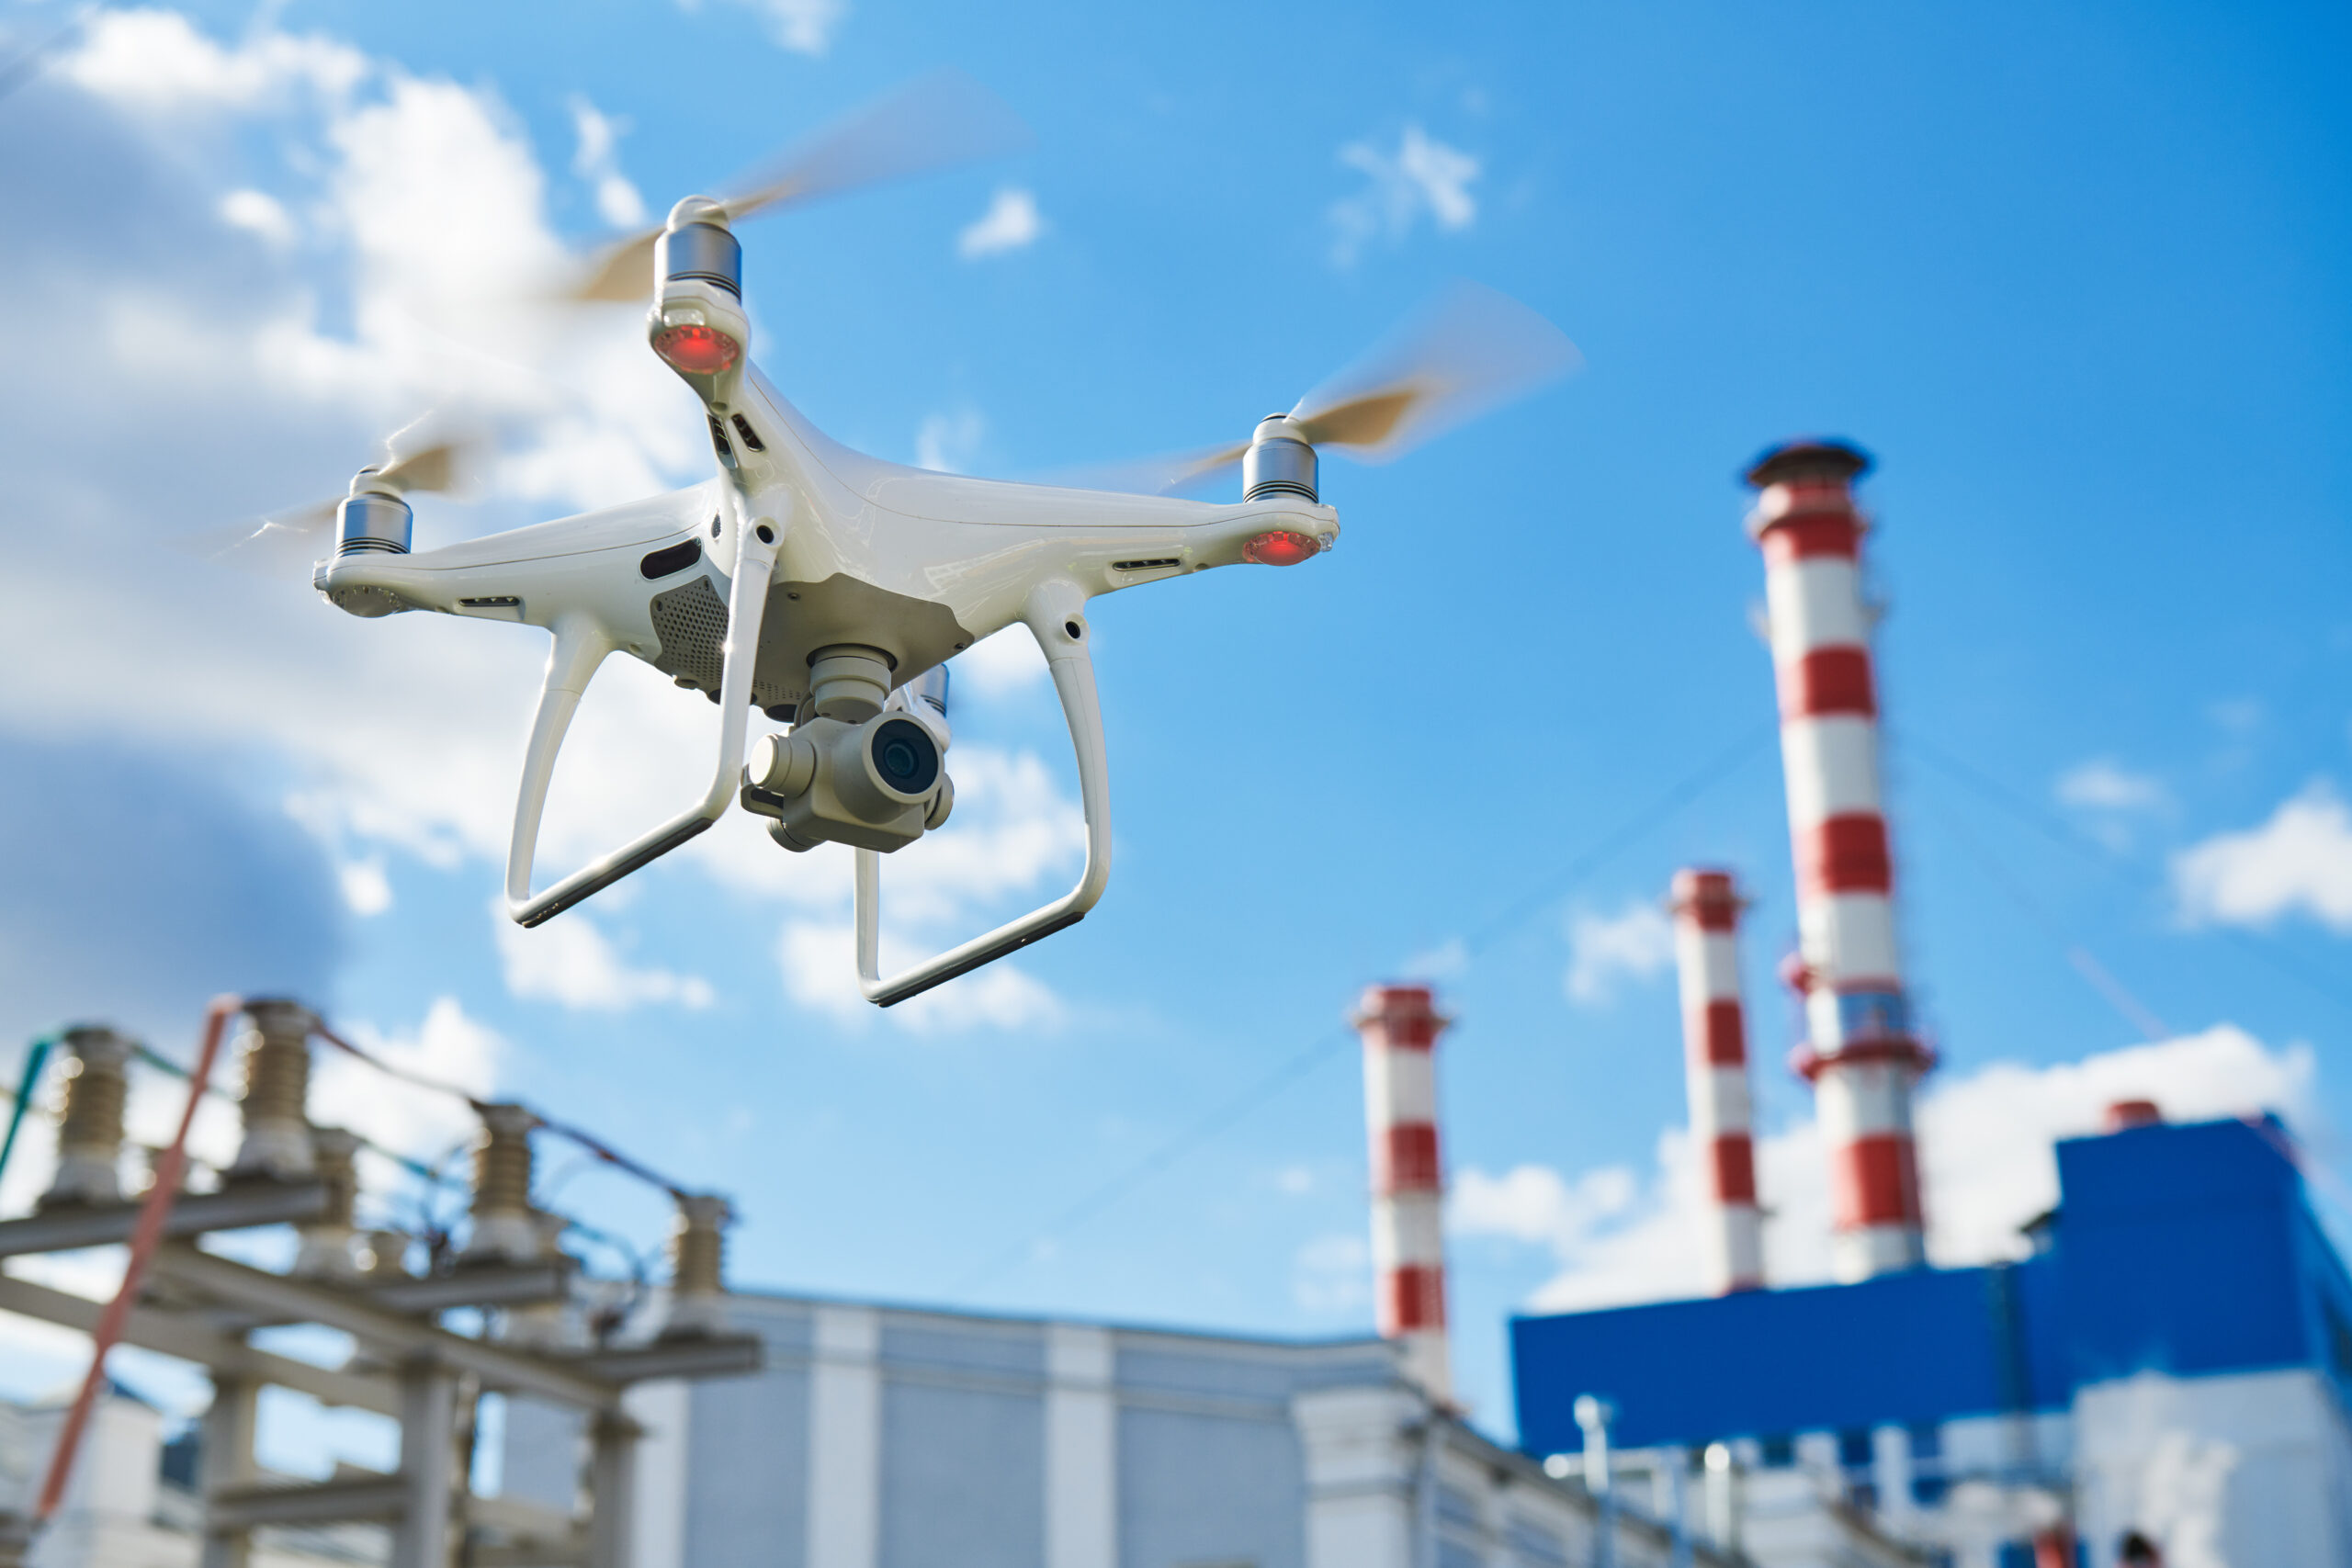 drone in midflight flying over an industrial manufacturing plant